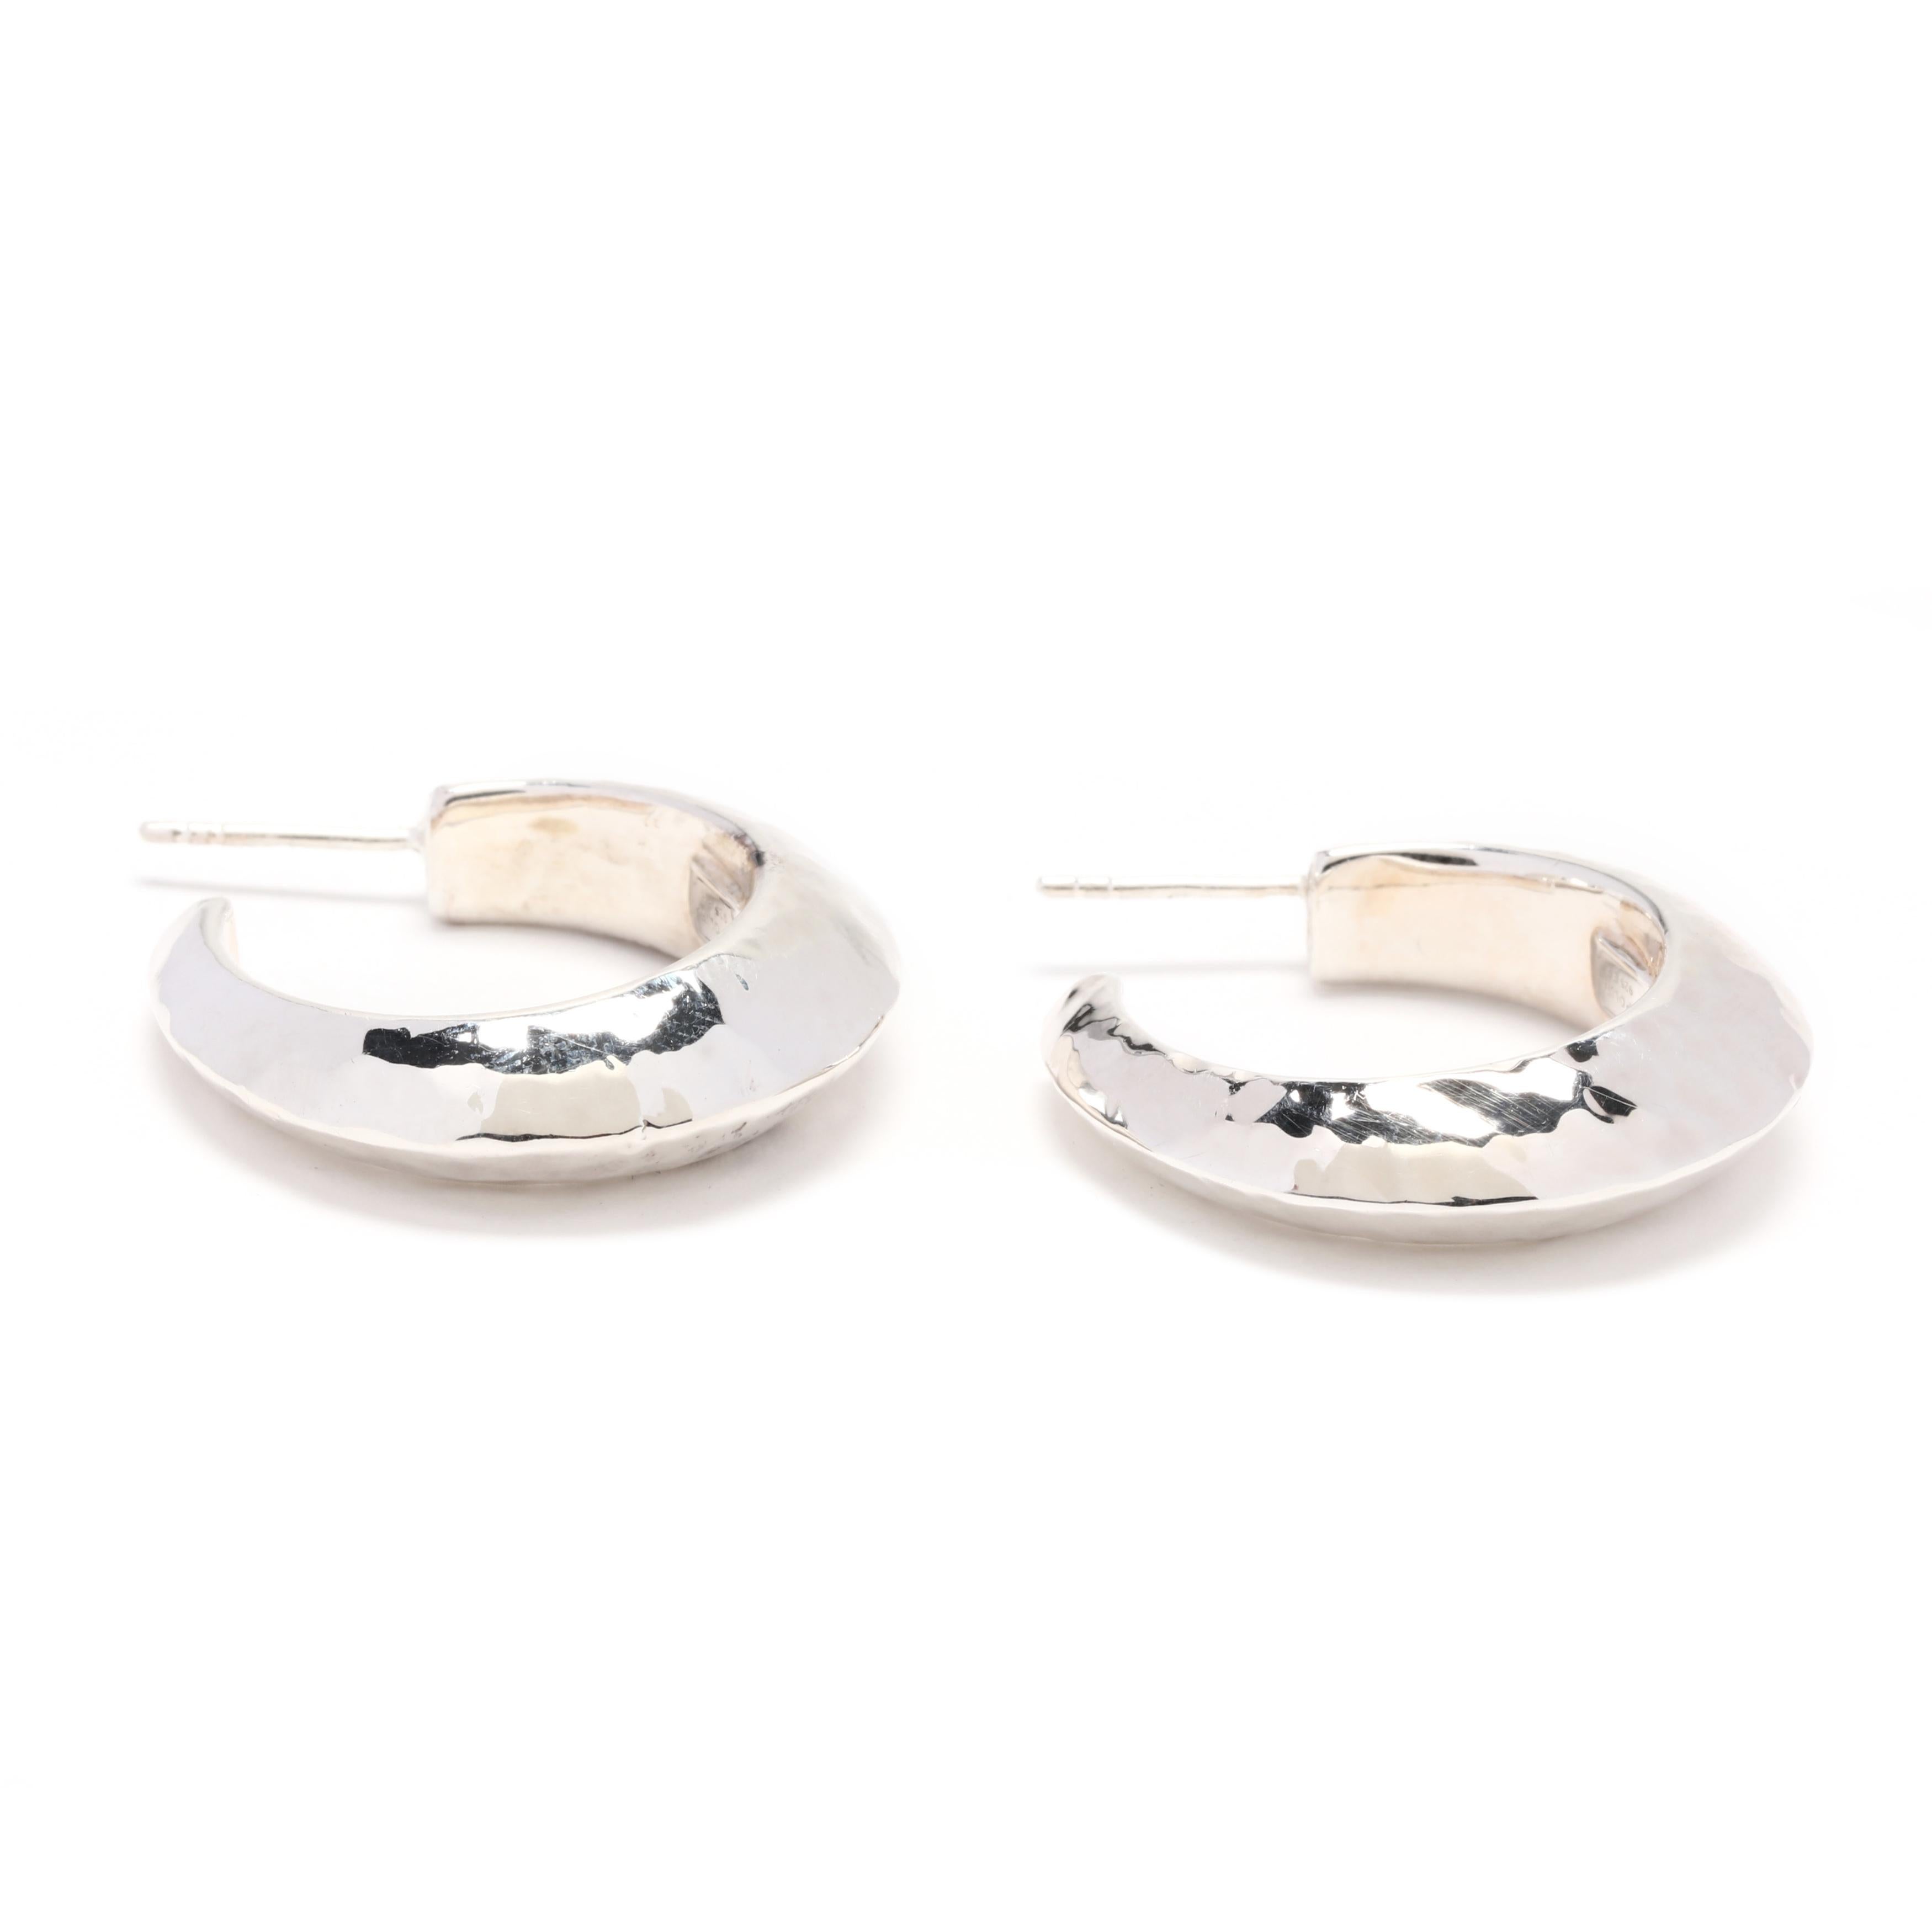 A pair of Ippolita sterling silver hammered hoop earrings. These medium size earrings feature a tapered, hammered knife edge hoop earrings with pierced butterfly backs.



Length: 1 1/16 in.



Width: 8 mm



Weight: 6.3 grams